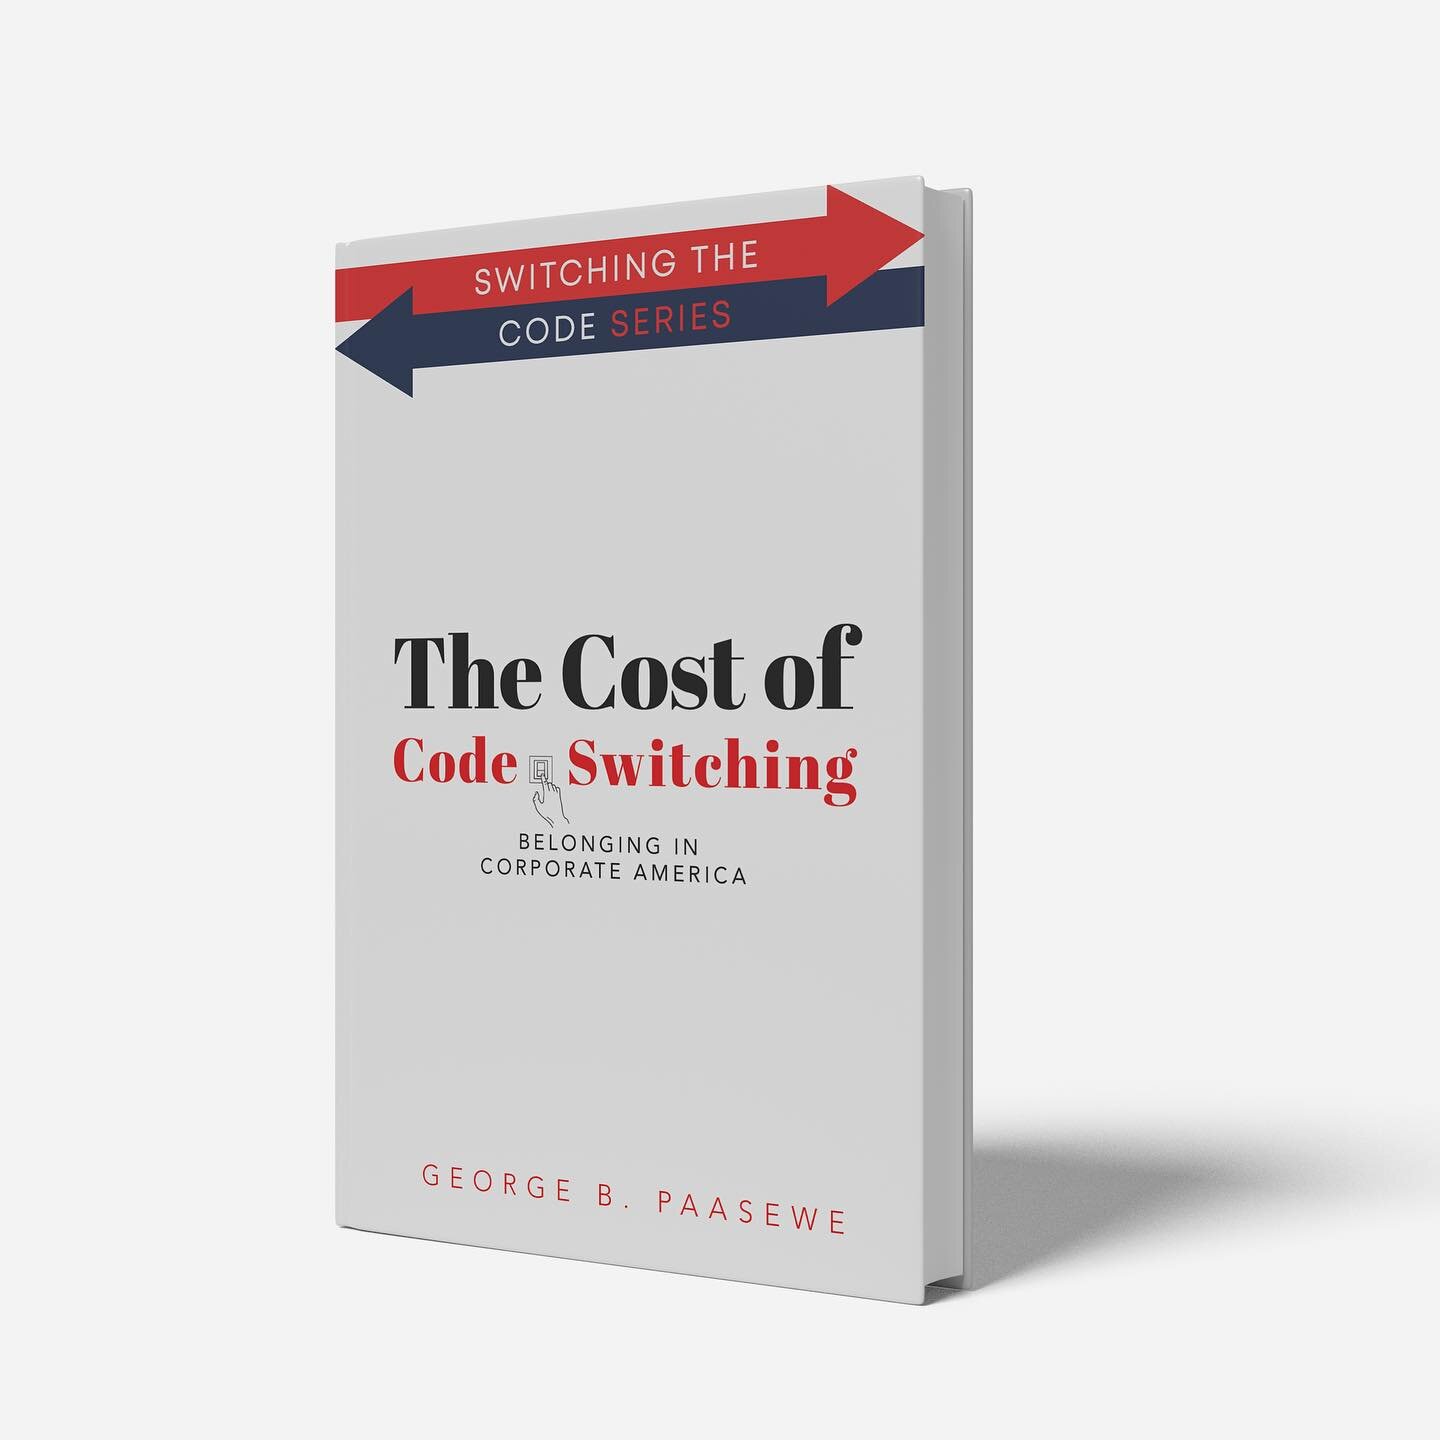 The Code-Switcher is excited to announce that we are now expanding our offerings to corporations. What better way to do so by writing a  book tailored specifically for corporations titled, The Cost of Code-Switching: Belonging in Corporate America.

